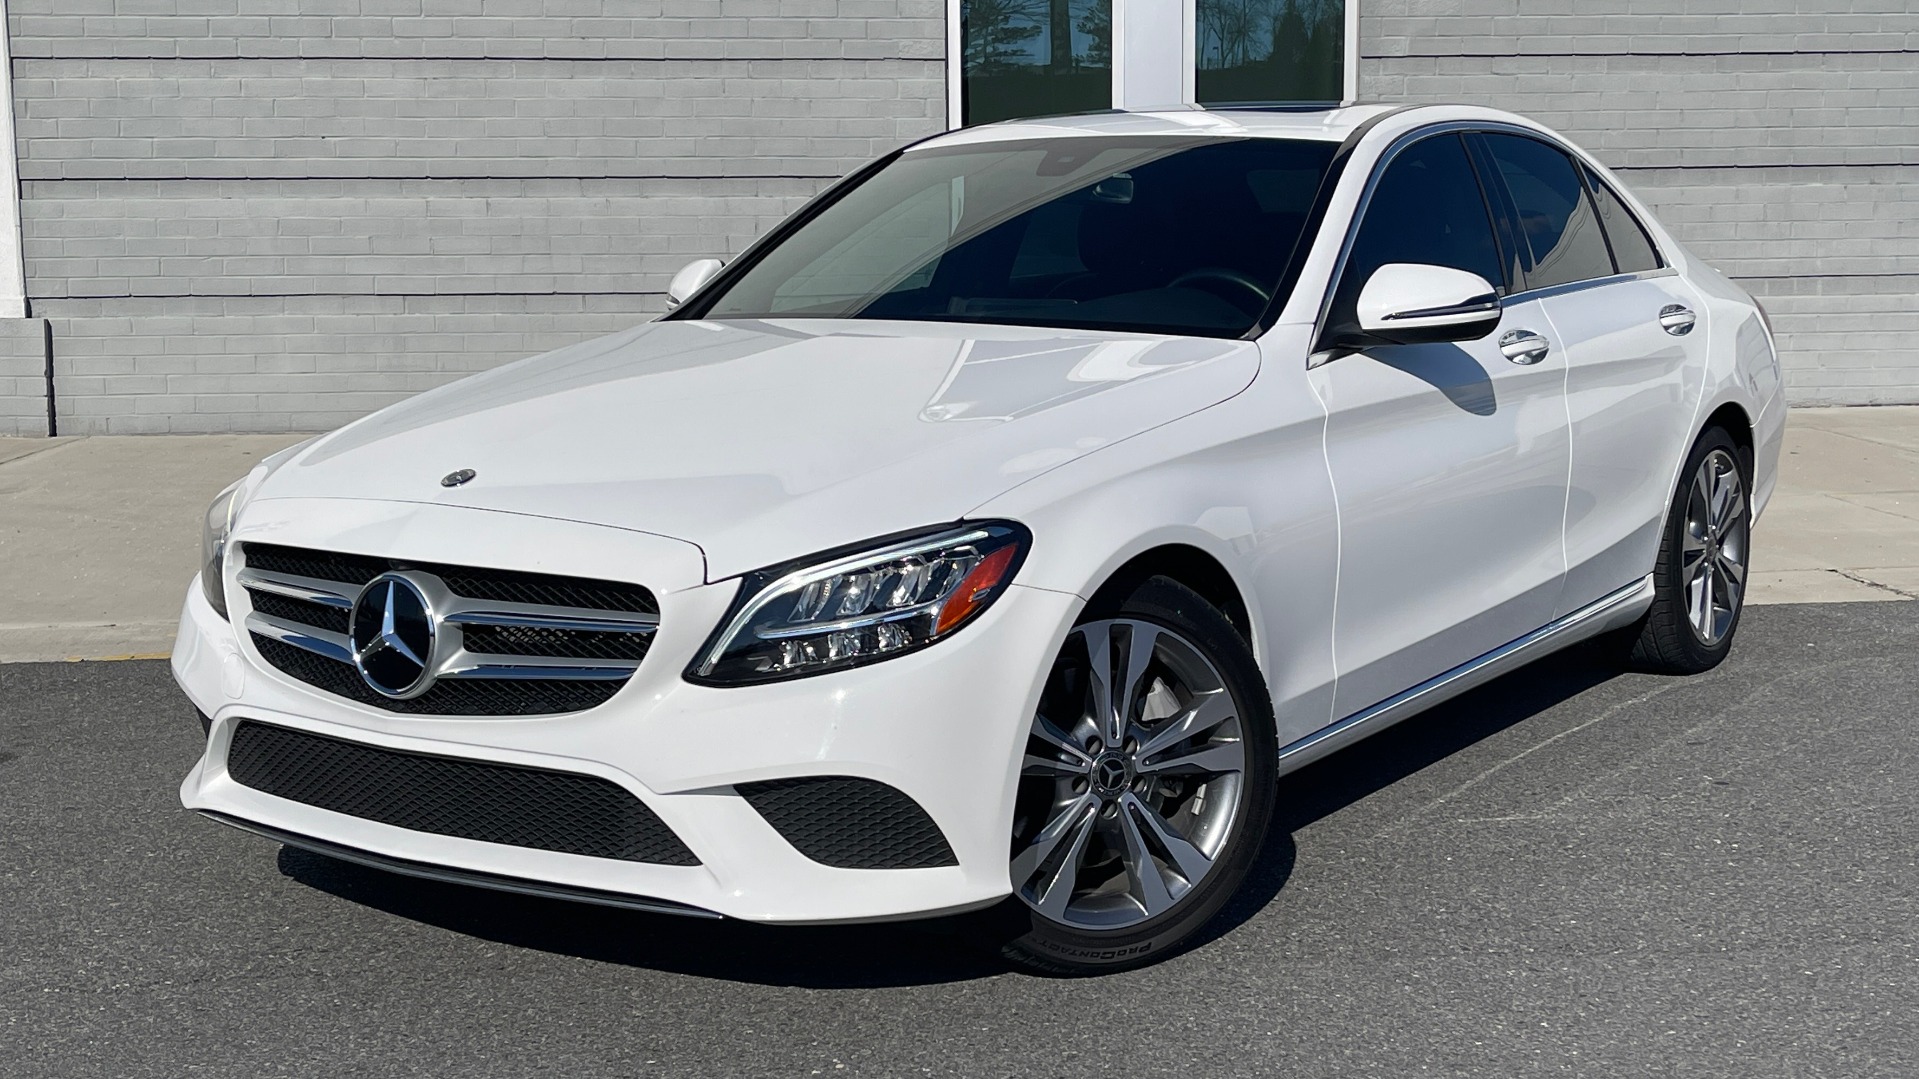 Used 2020 Mercedes-Benz C-CLASS C 300 2.0L SEDAN / RWD / 9-SPD AUTO / HTD STS / REARVIEW for sale $40,995 at Formula Imports in Charlotte NC 28227 1